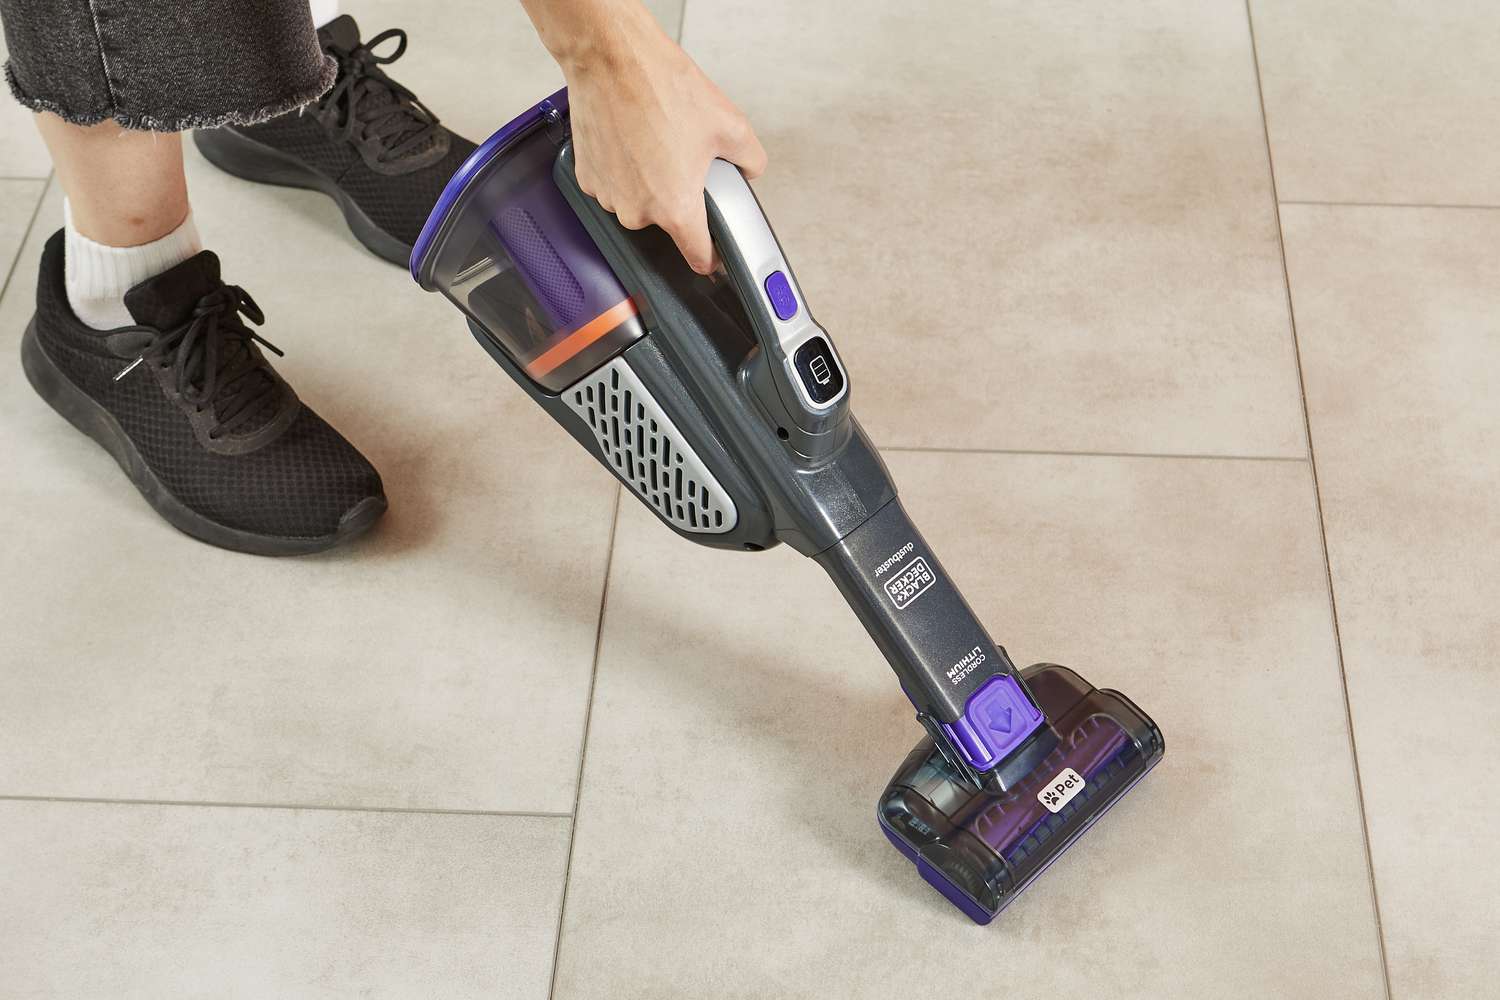 Hand using the Black+Decker Dustbuster AdvancedClean+ Pet Cordless Hand Vacuum Cleaner to clean tile floor